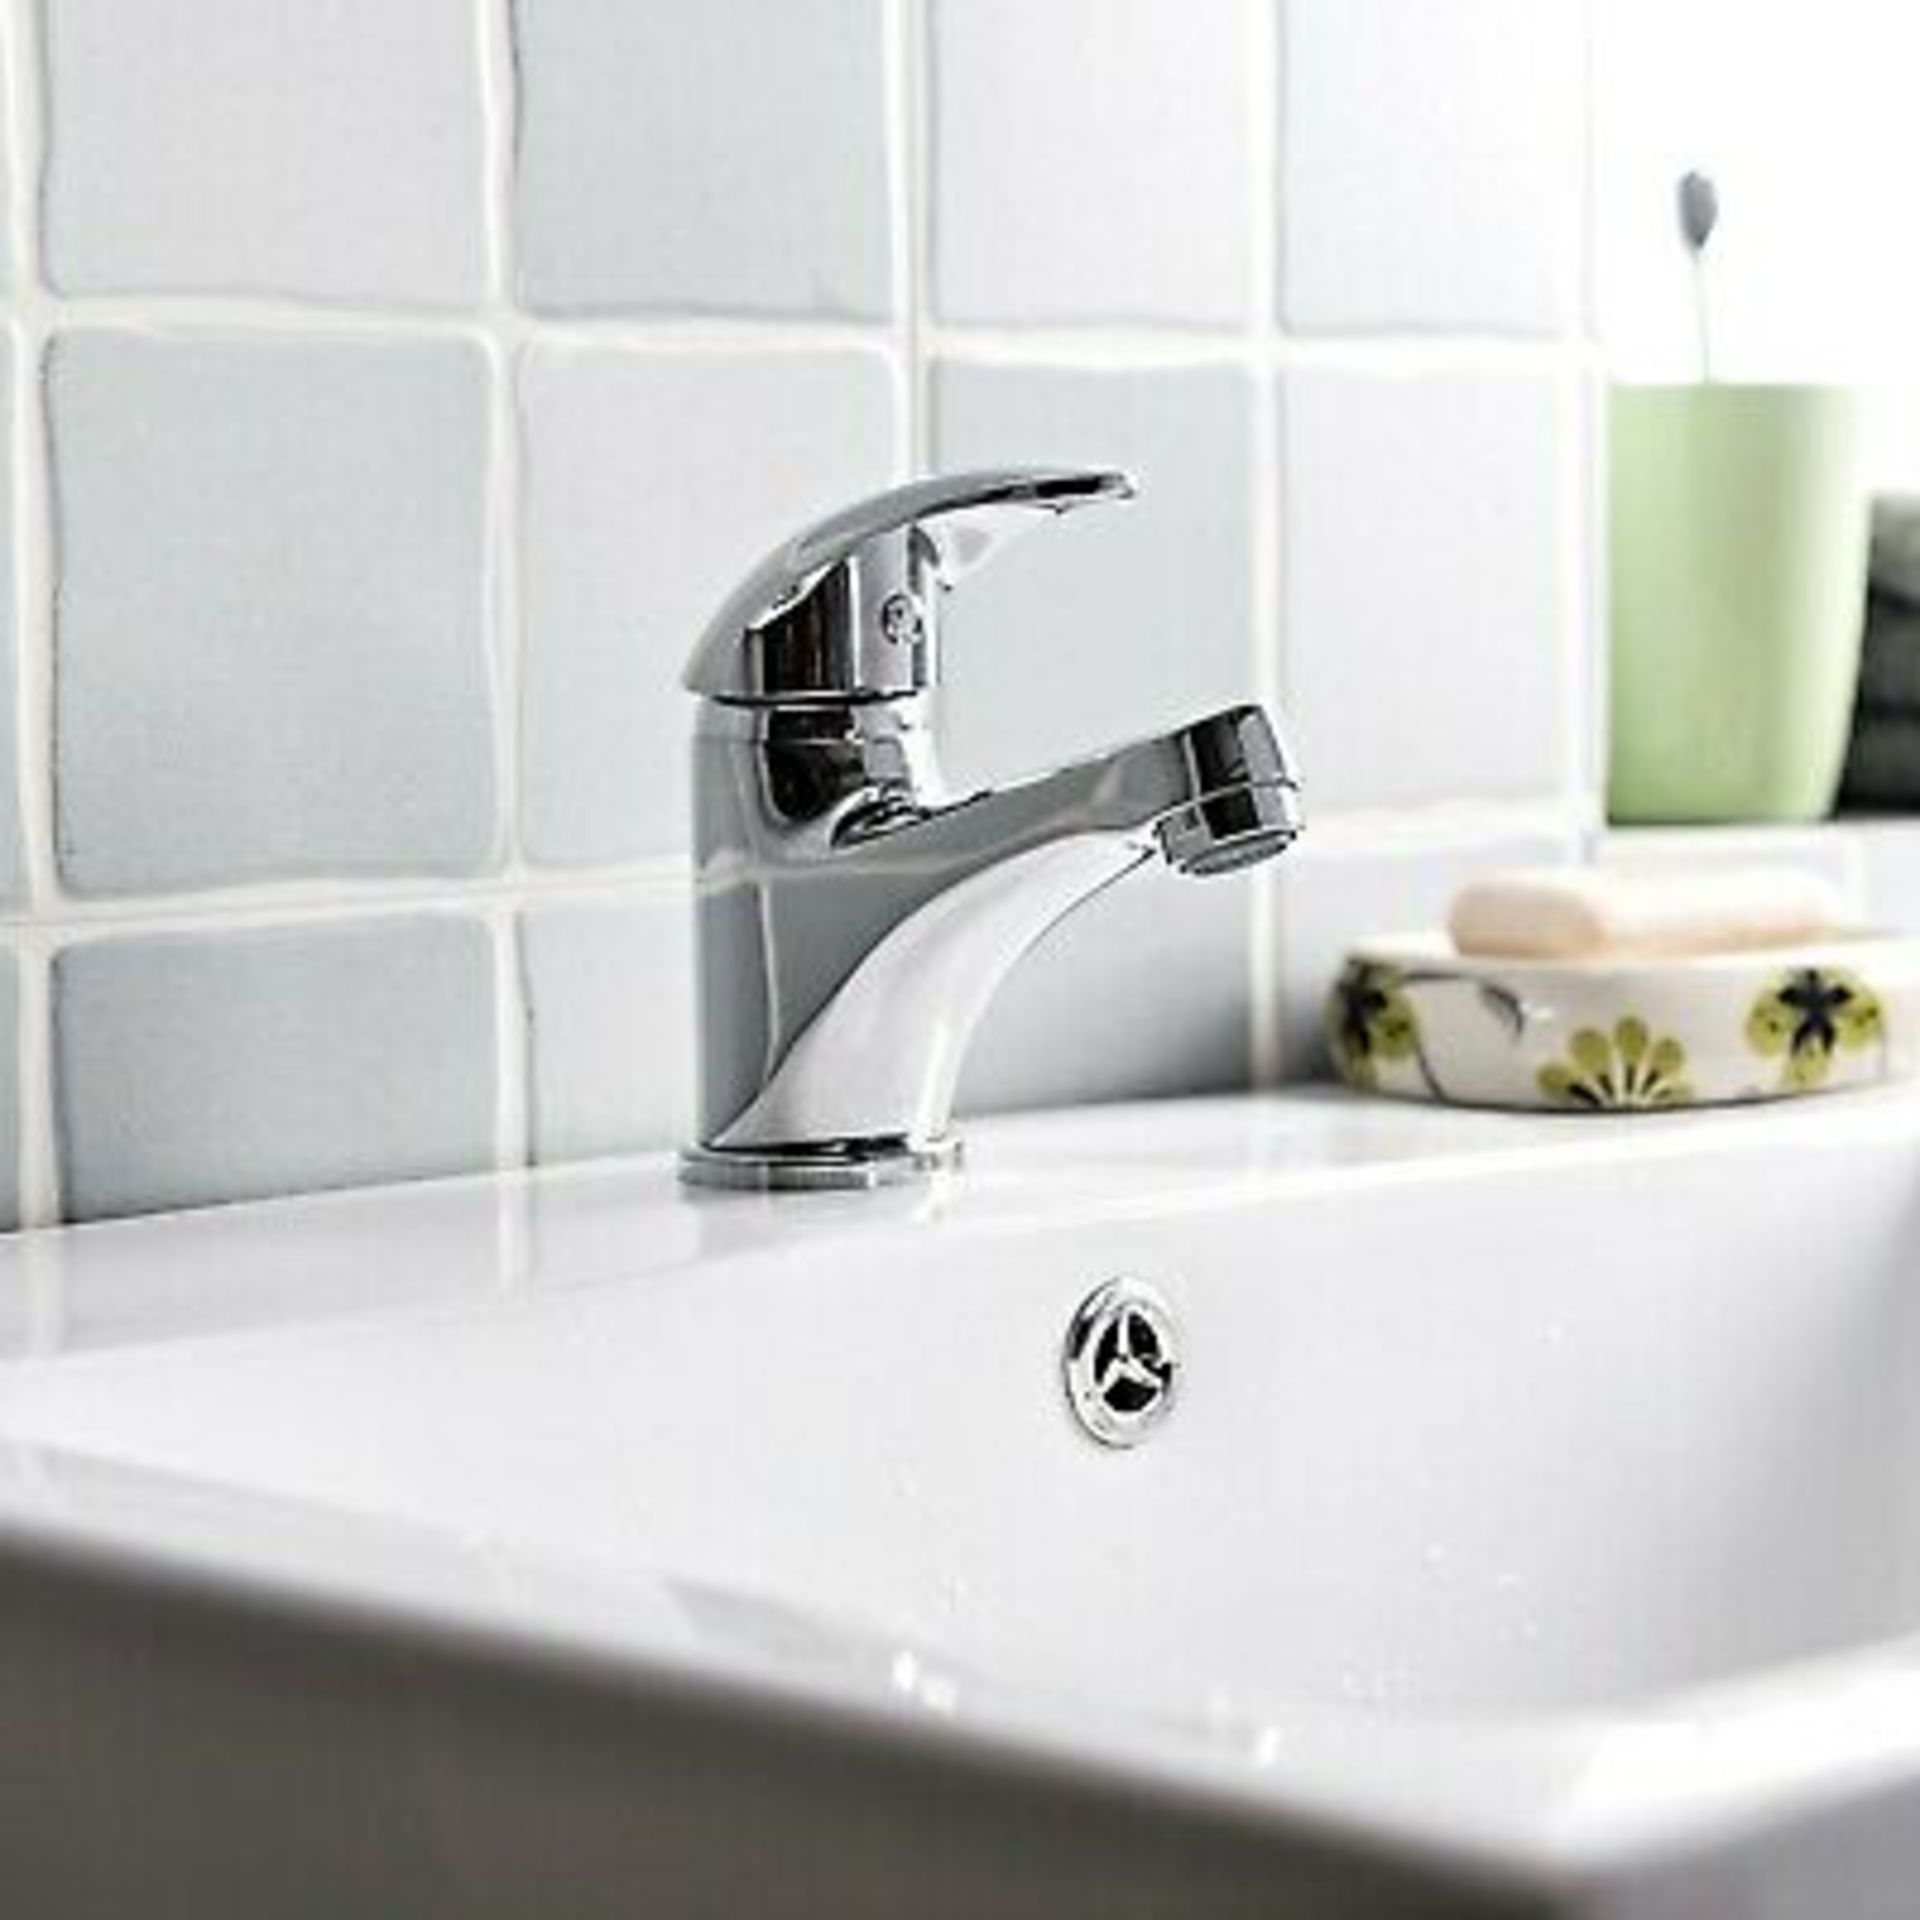 NEW (REF219) Eidar 1 lever Chrome-plated Contemporary Basin Mono mixer Tap. This traditional st...